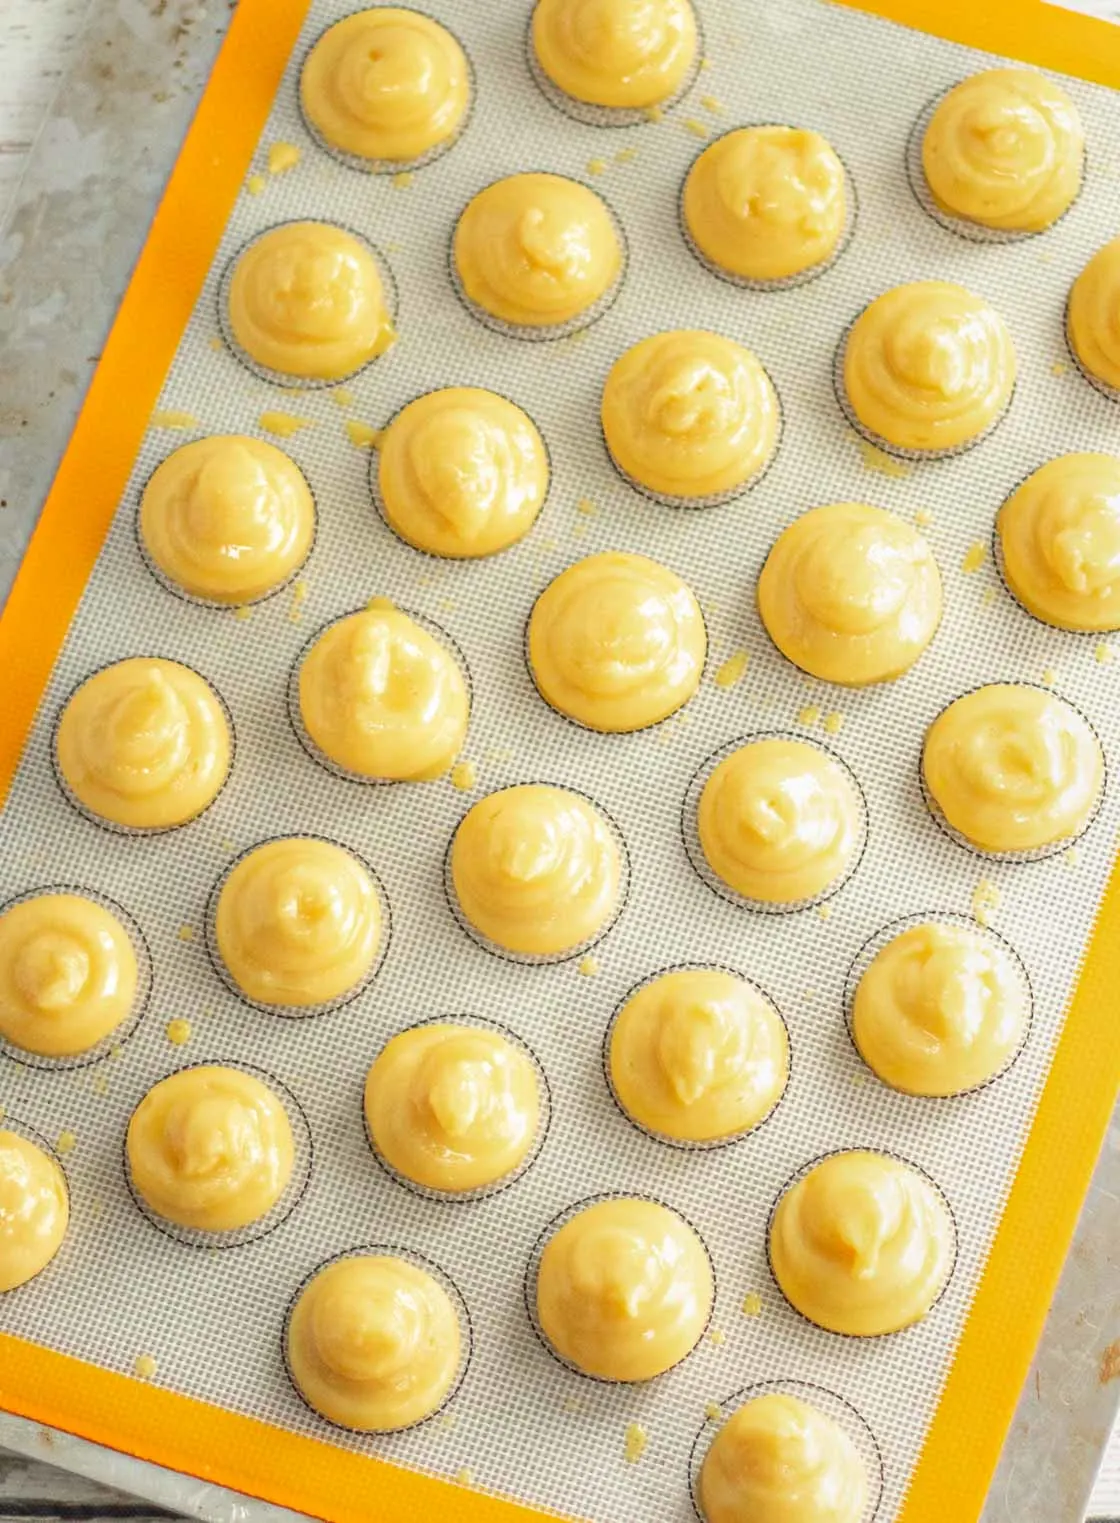 Cream puff dough piped in circles on a silicone baking mat.